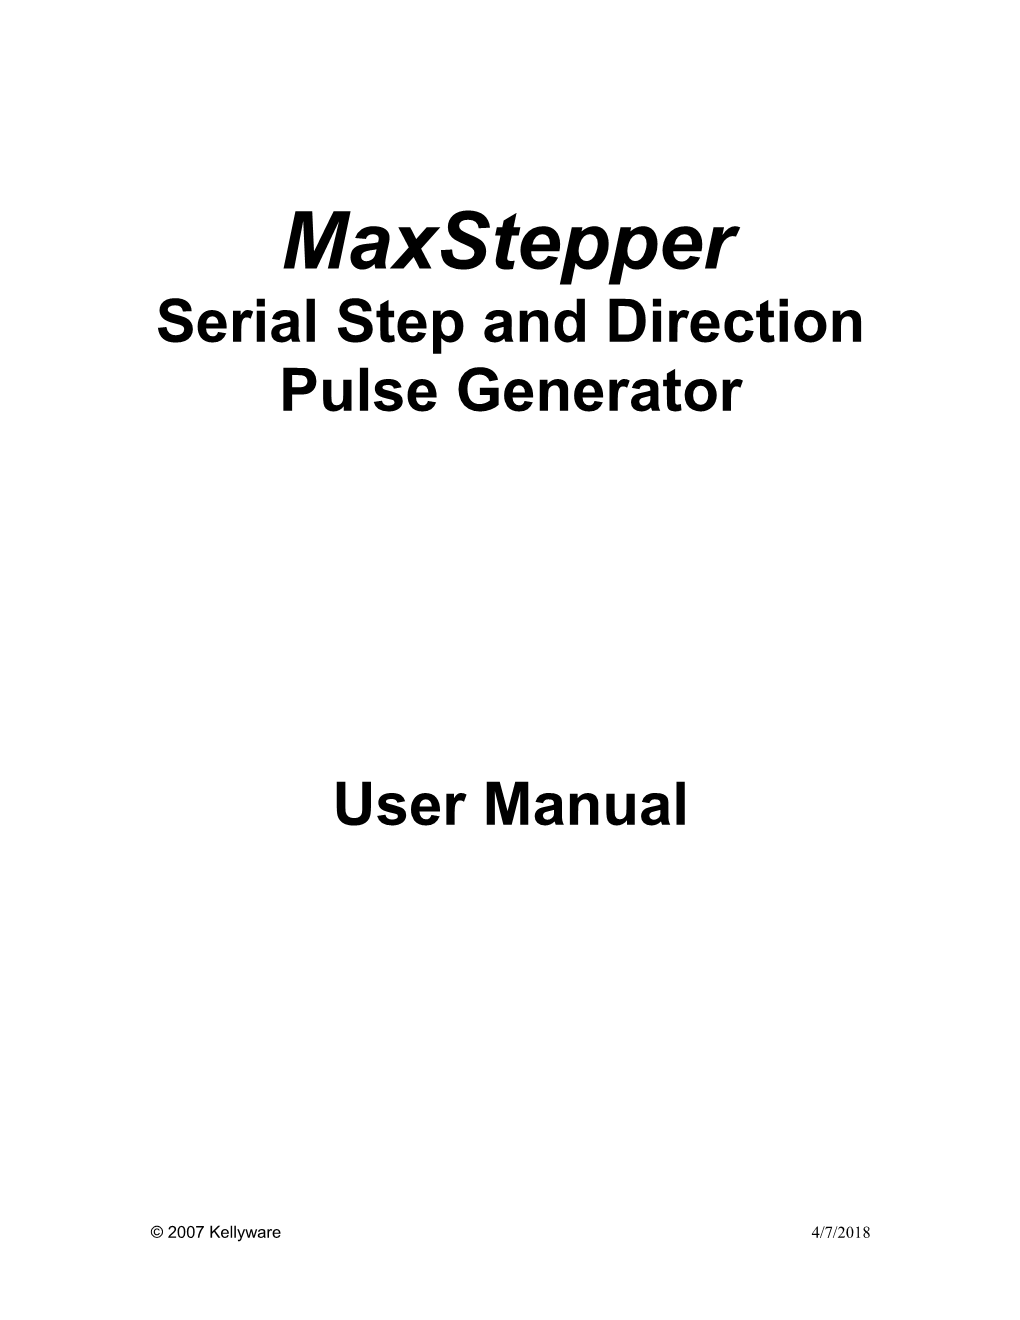 Serial Step and Direction Pulse Generator